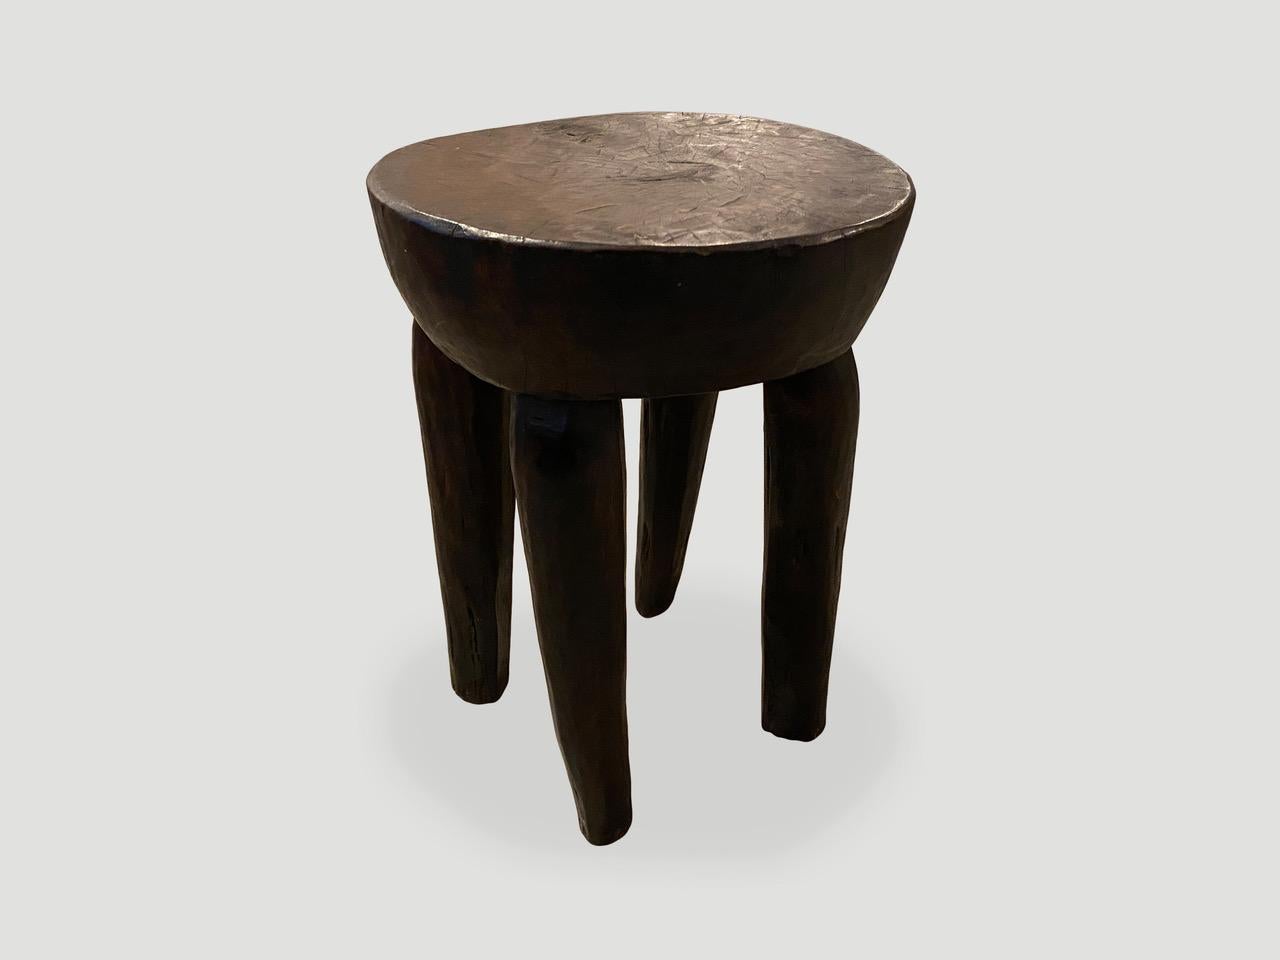 Antique African side table or stool hand carved from a single block of mahogany wood. The top is a thick bevel with beautiful hand carved legs. We only source the best.

This side table or stool was sourced in the spirit of wabi-sabi, a Japanese